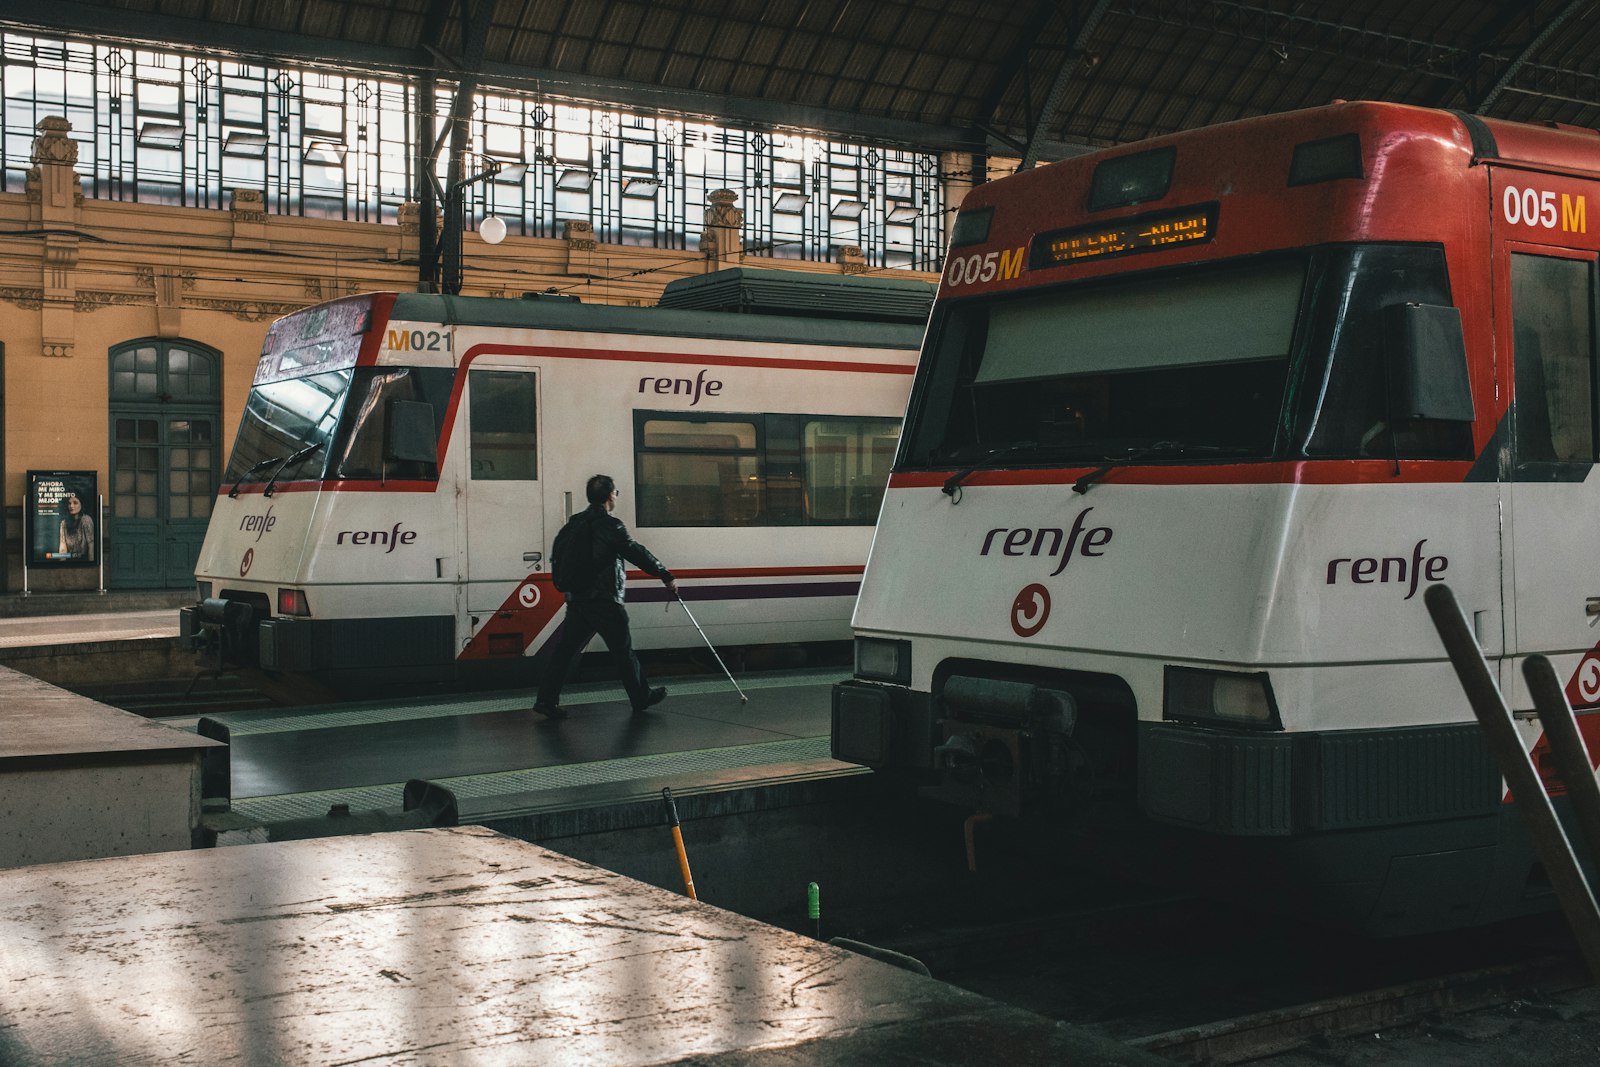 Leica M10-P sample photo. White and red renfe photography